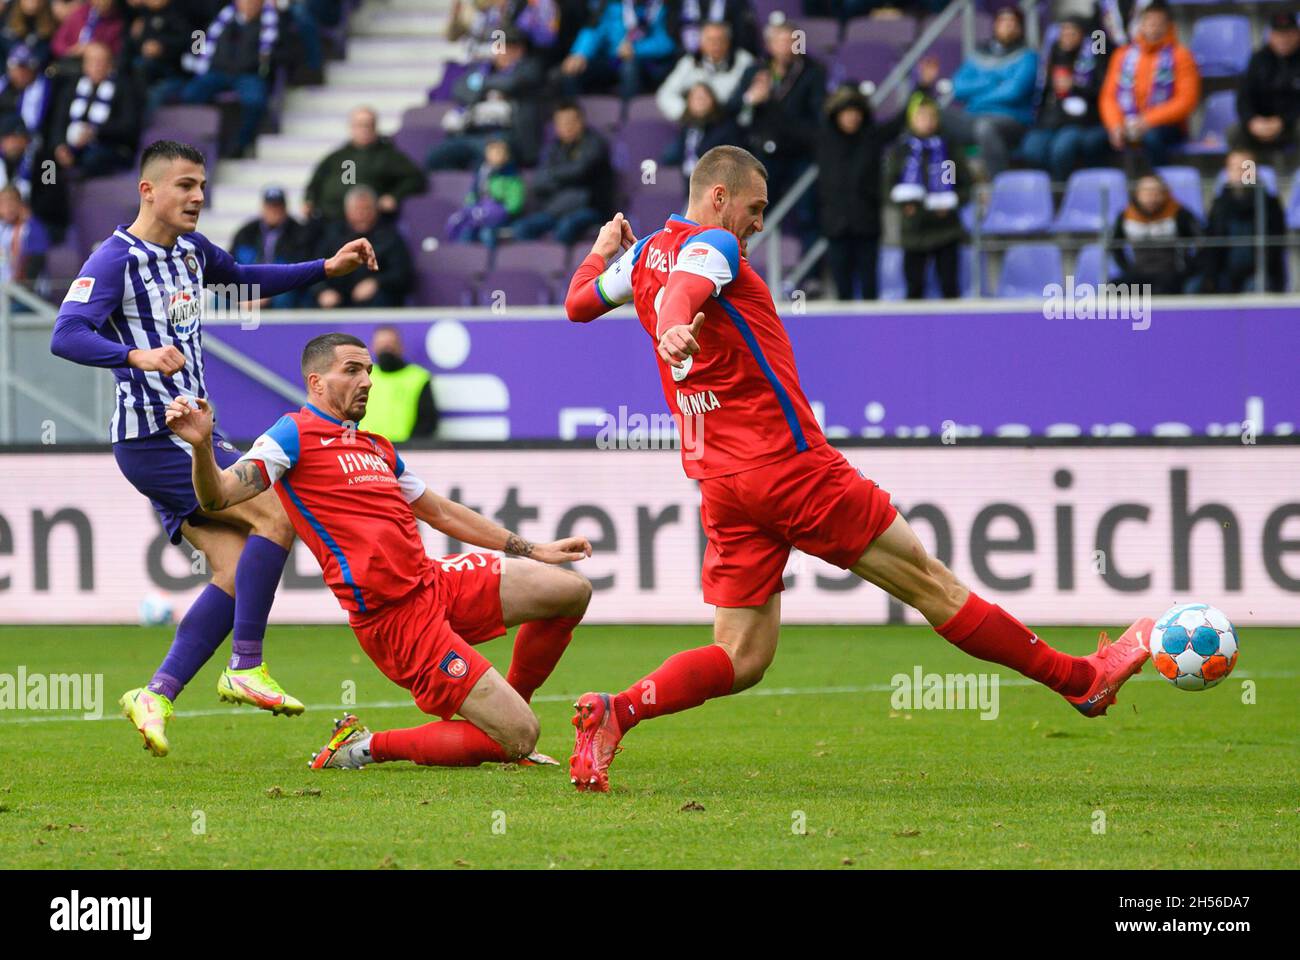 07 November 2021, Saxony, Aue: Football: 2. Bundesliga, Erzgebirge Aue - 1. FC Heidenheim, Matchday 13, Erzgebirgsstadion. Aue's Antonio Jonjic (l) scores against Heidenheim's Norman Theuerkauf (m) and Patrick Mainka to make it 2:0. Photo: Robert Michael/dpa-Zentralbild/dpa - IMPORTANT NOTE: In accordance with the regulations of the DFL Deutsche Fußball Liga and/or the DFB Deutscher Fußball-Bund, it is prohibited to use or have used photographs taken in the stadium and/or of the match in the form of sequence pictures and/or video-like photo series. Stock Photo